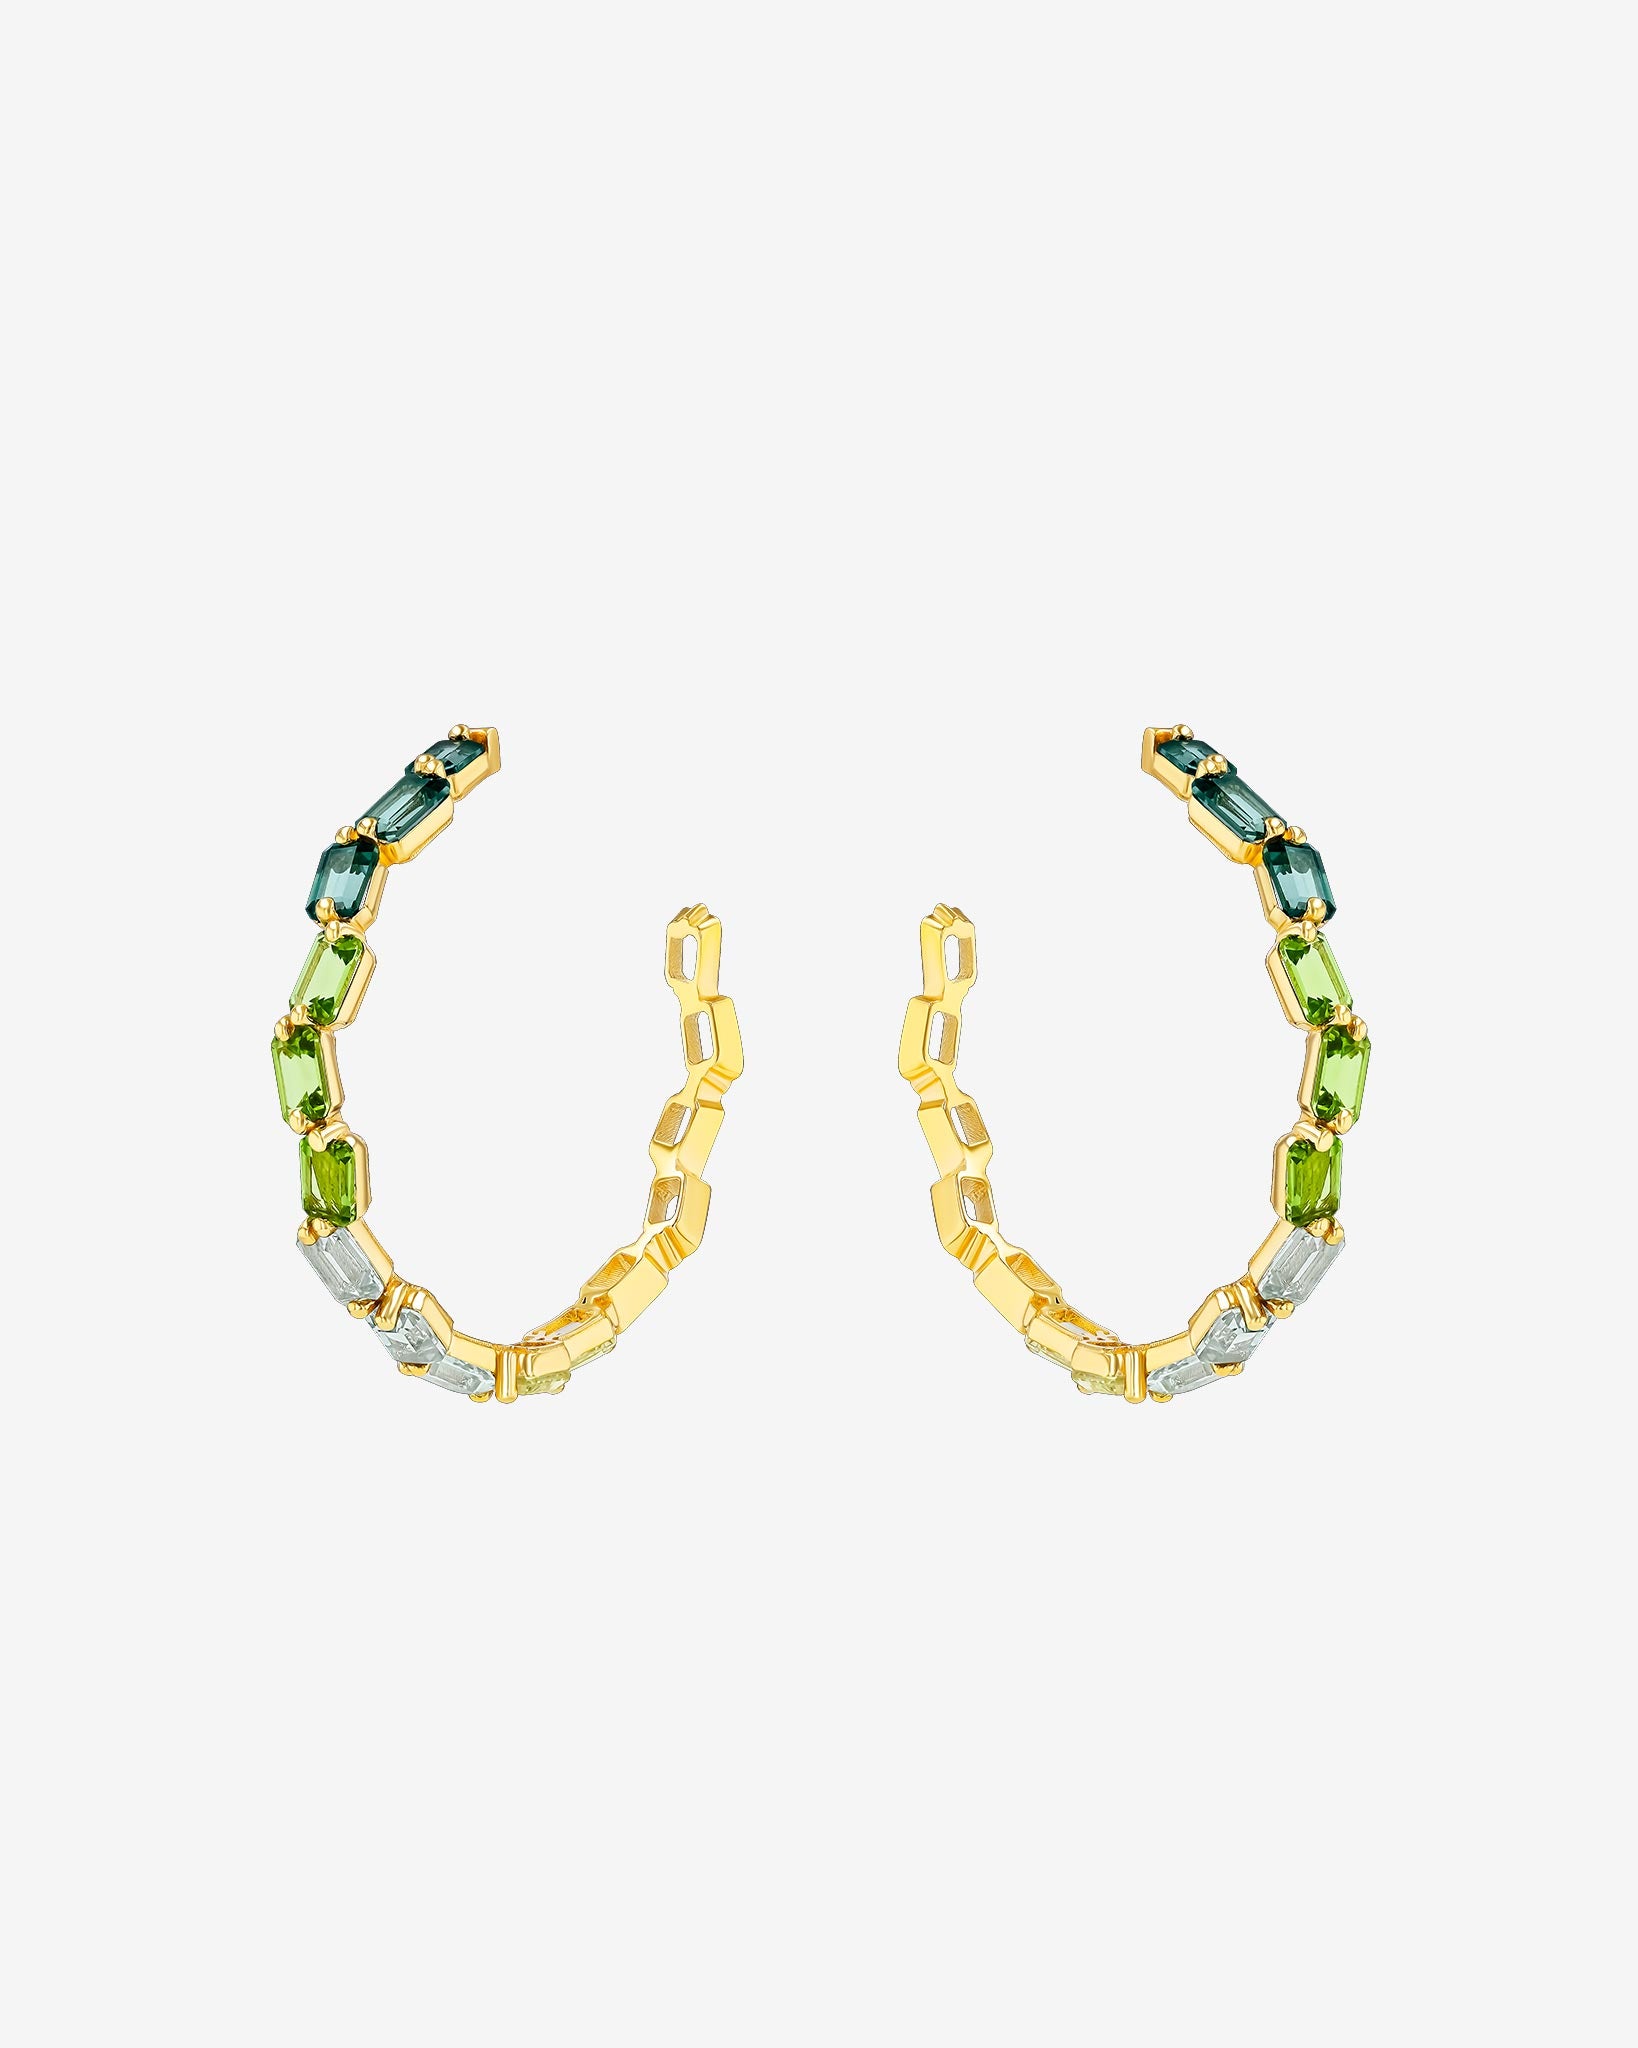 Kalan By Suzanne Kalan Ann Green Ombre Milli Hoops in 14k yellow gold